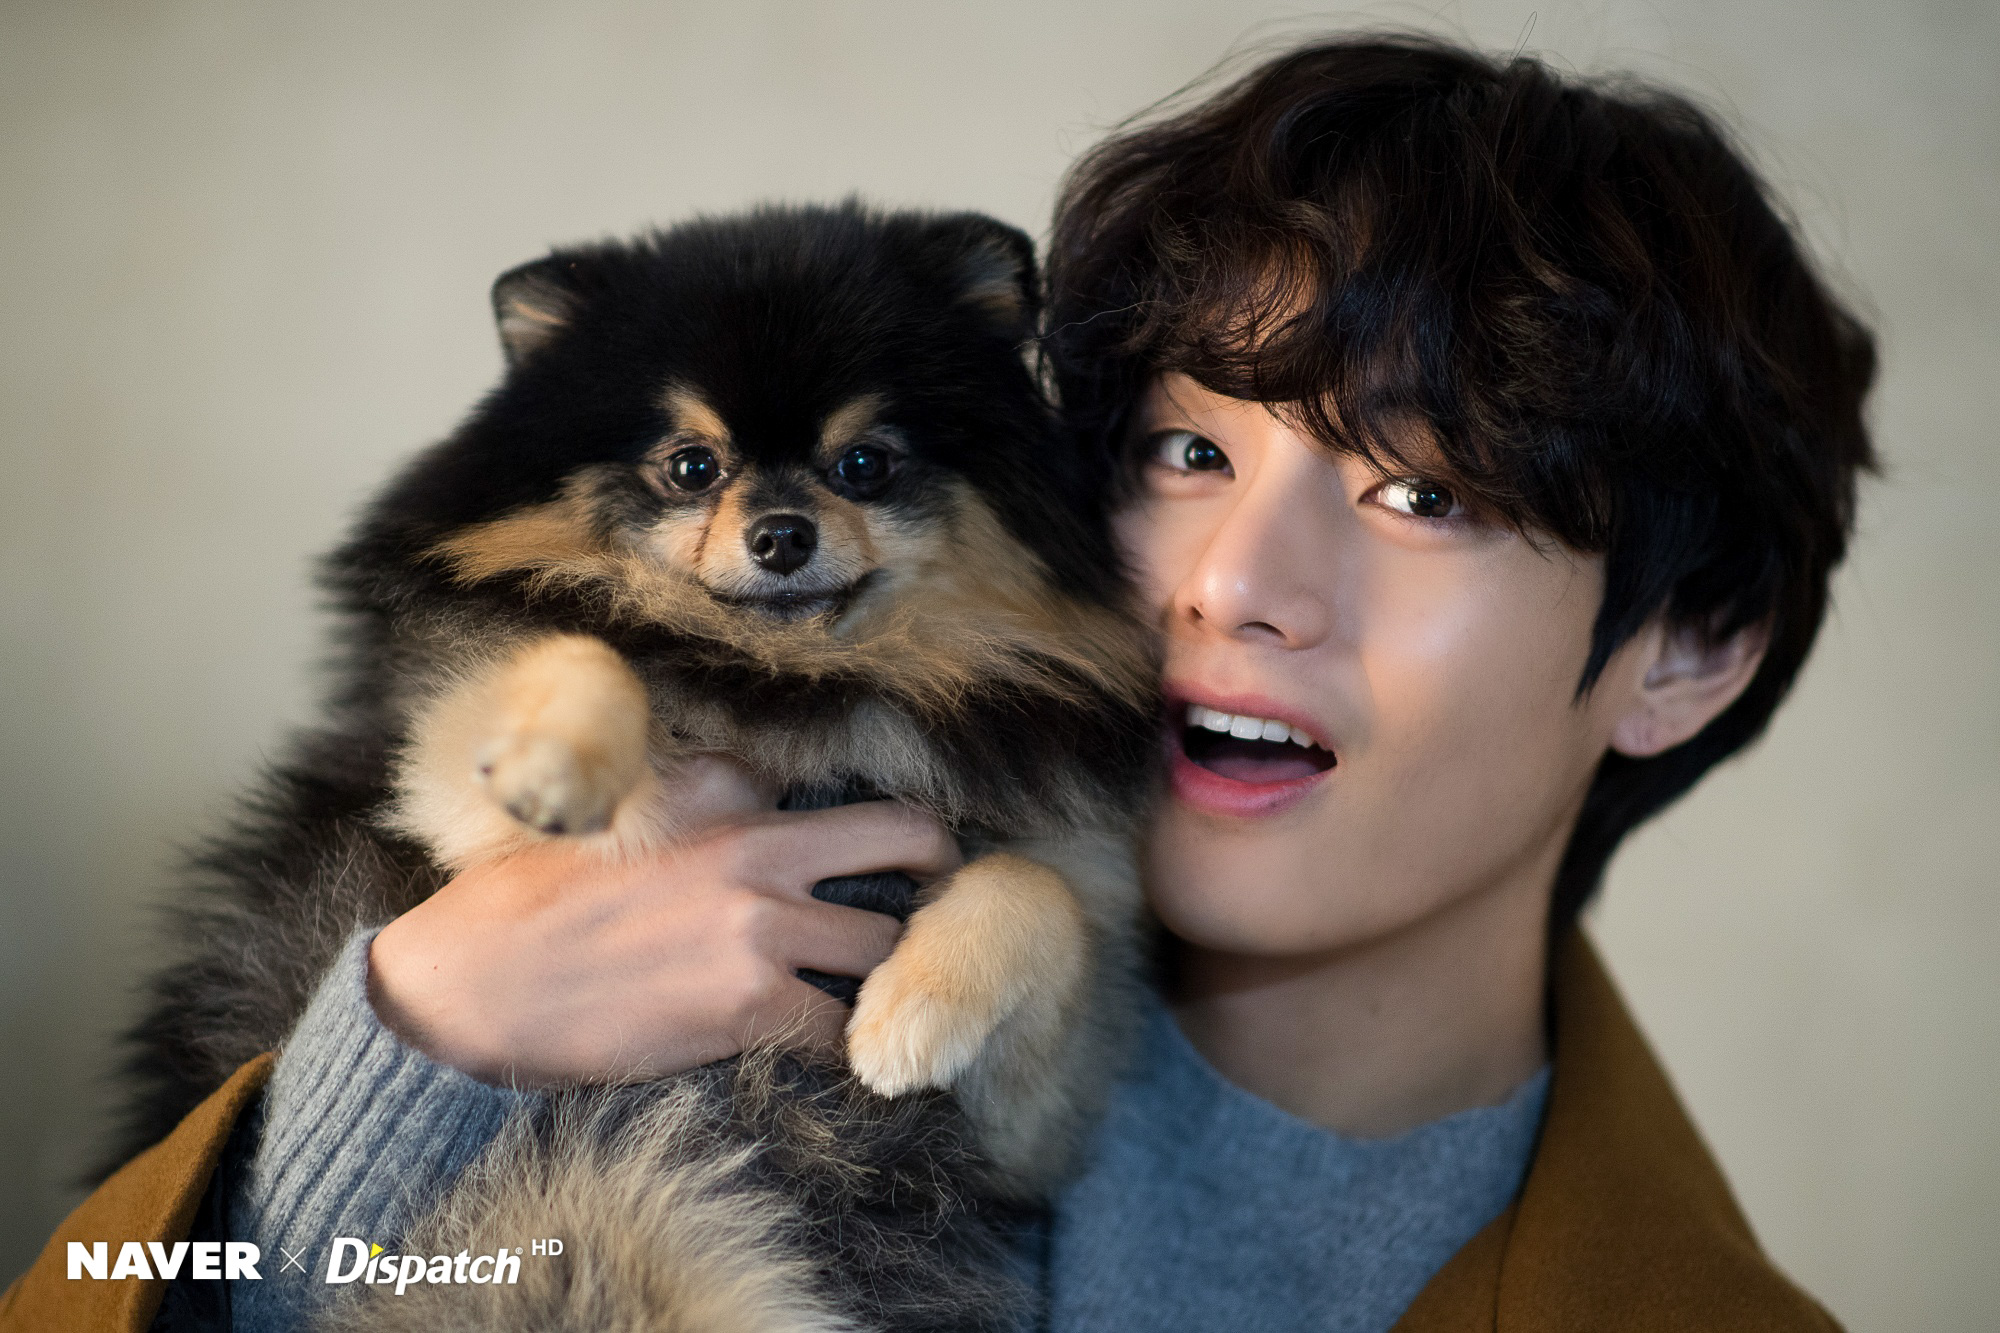 [Picture+Video/Dispatch] BTS’ V With Yeontan [191231]